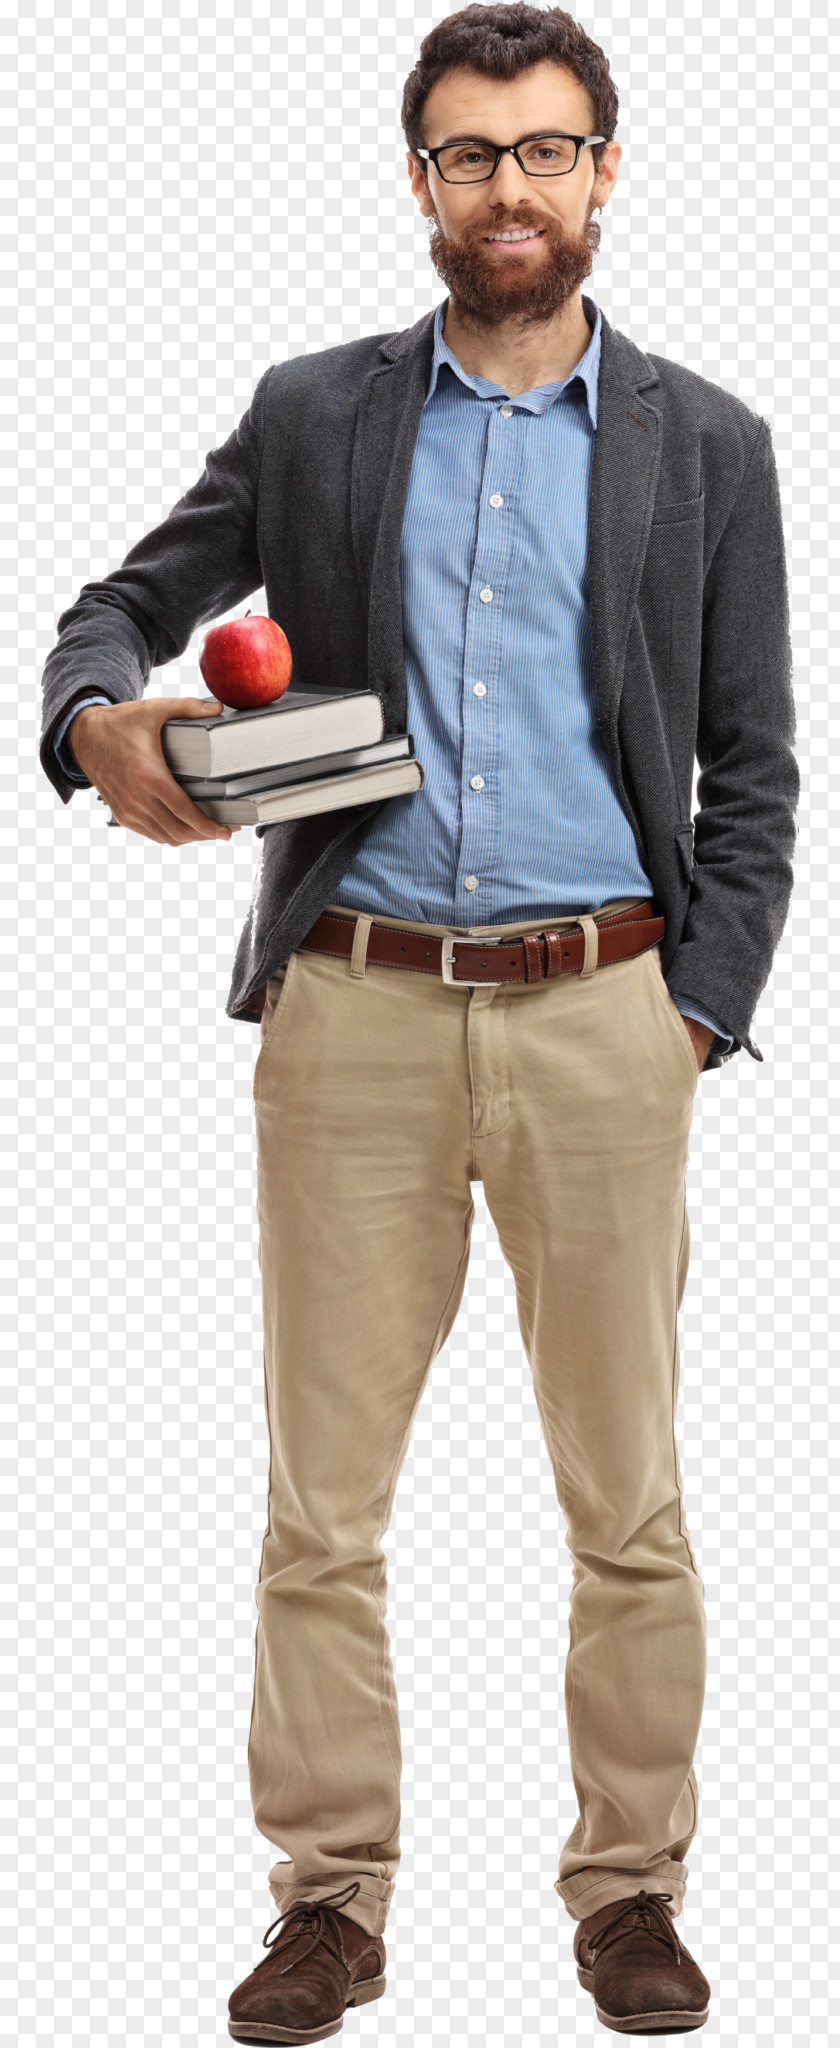 Bald Male Elementary Teacher Stock Photography Image Royalty-free Video PNG